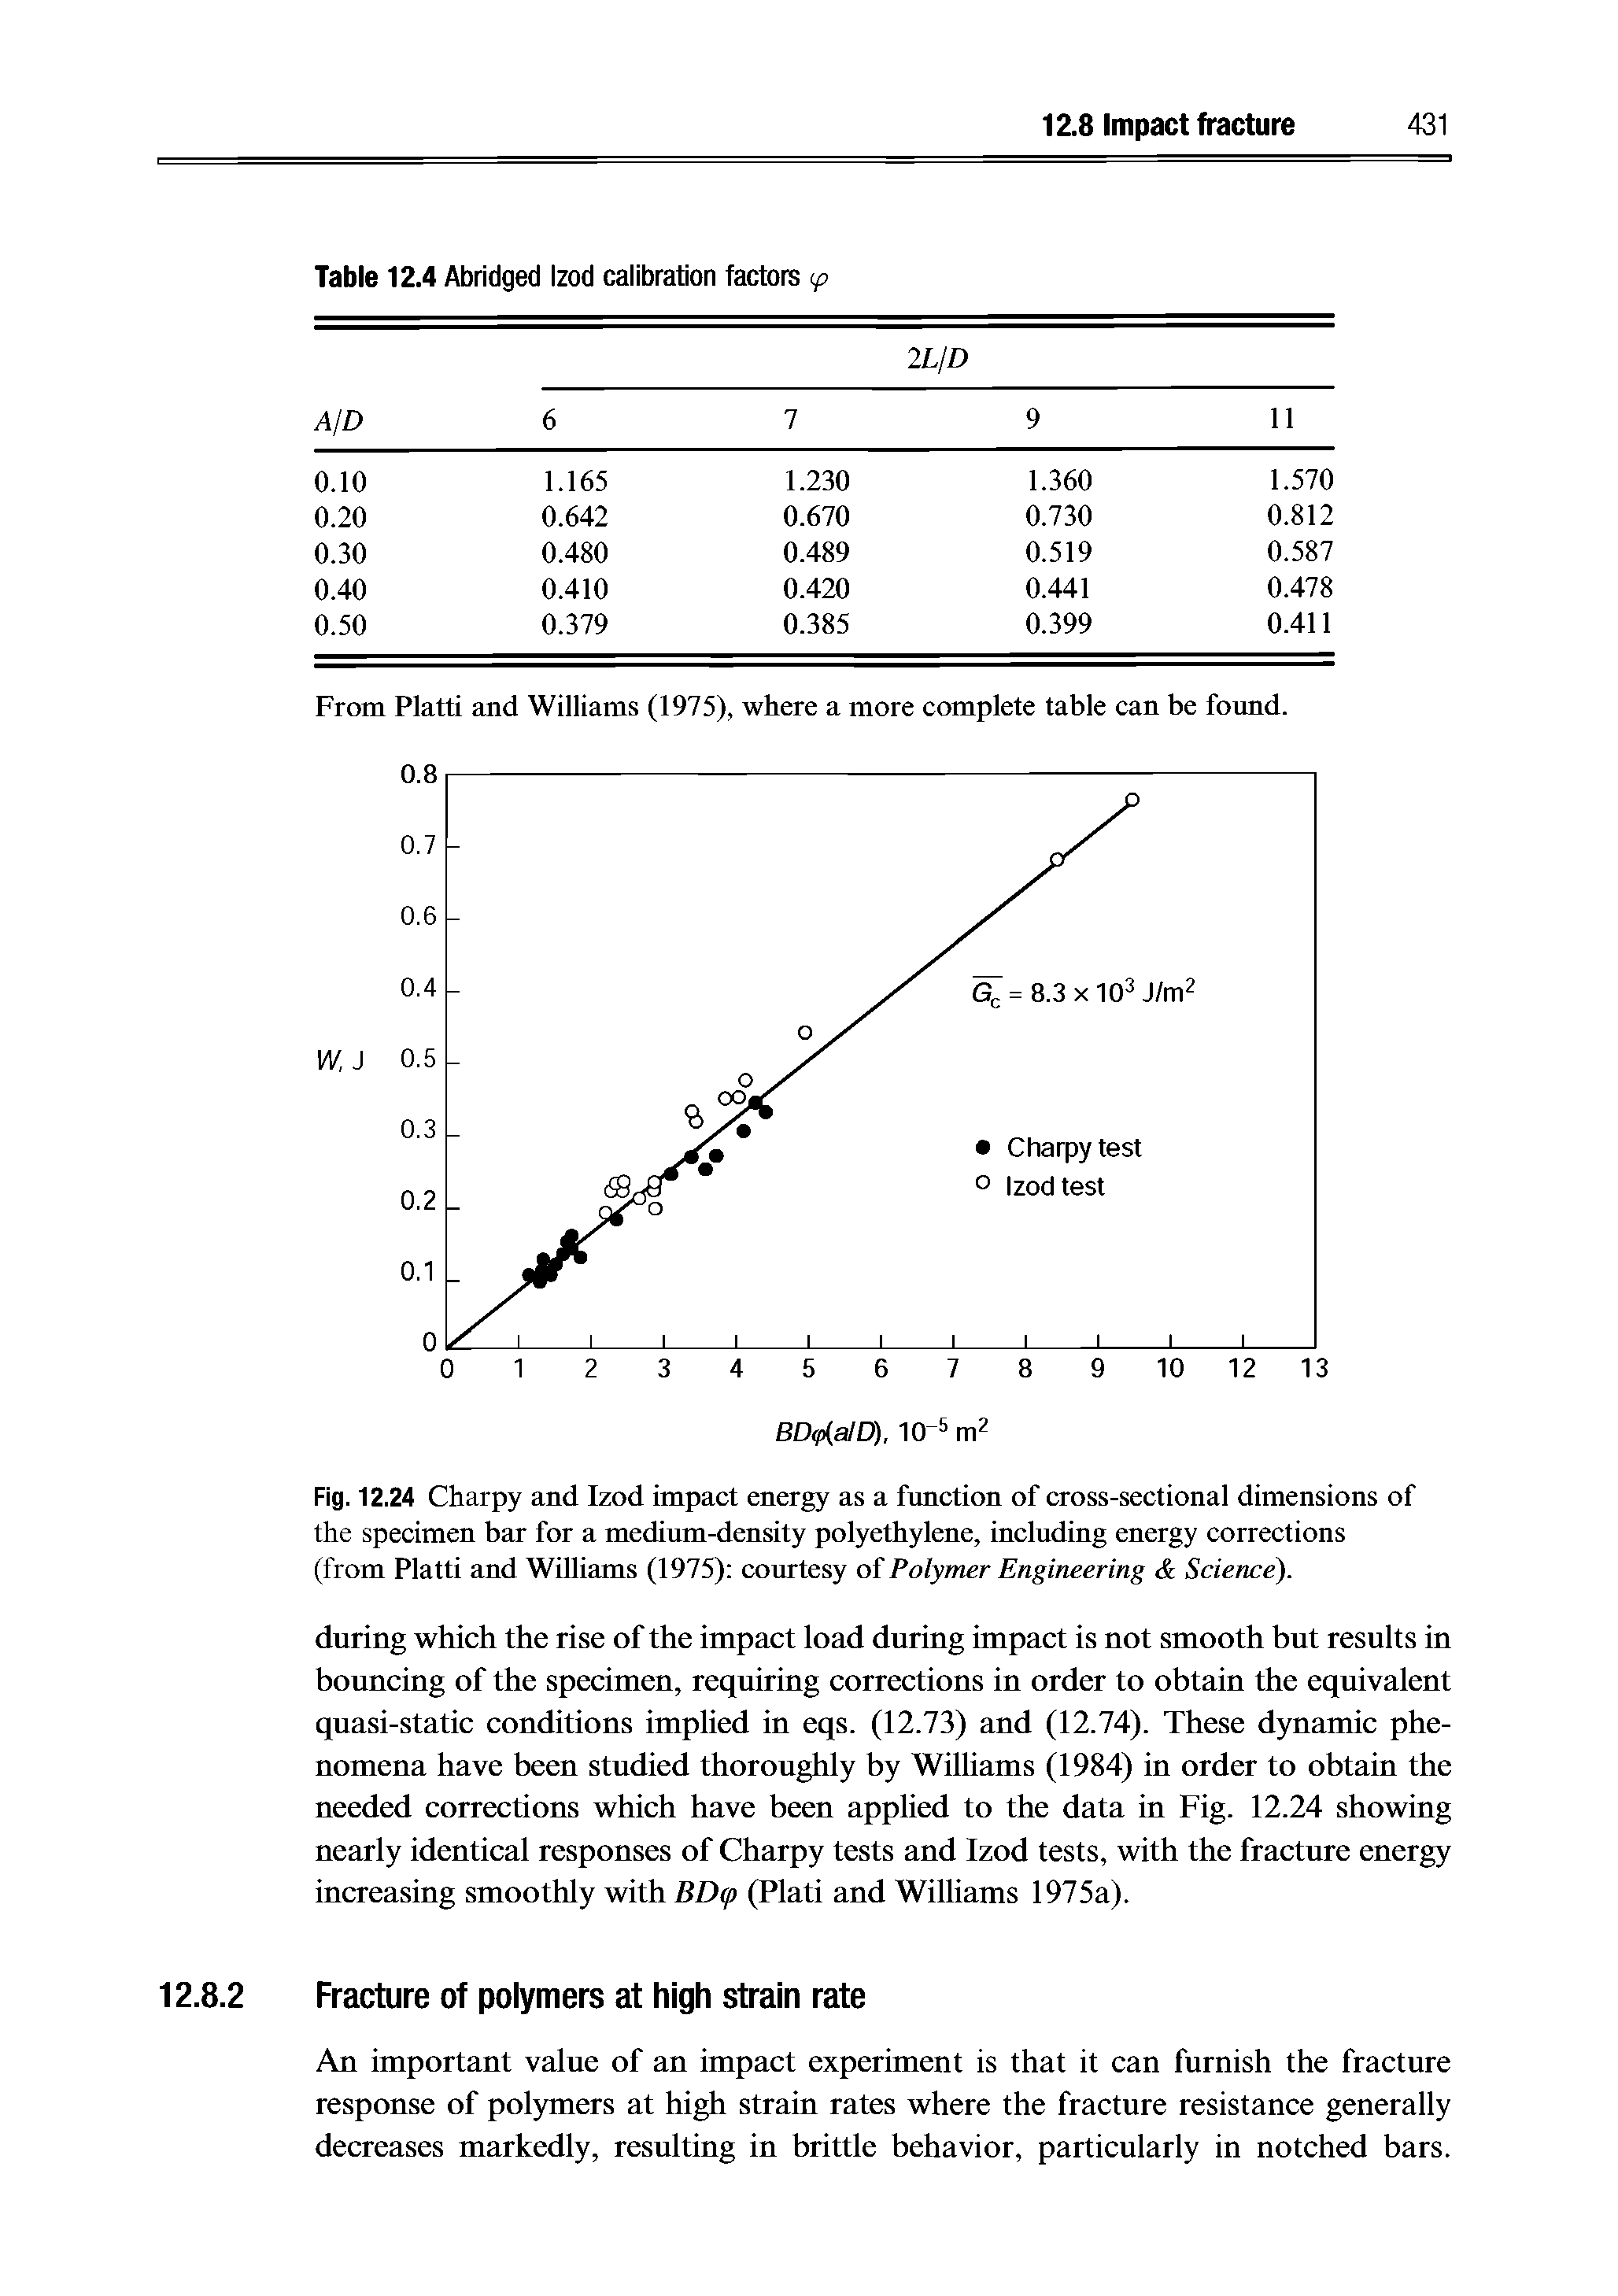 Fig. 12.24 Charpy and Izod impact energy as a function of cross-sectional dimensions of the specimen bar for a medium-density polyethylene, including energy corrections (from Platti and Williams (1975) courtesy oi Polymer Engineering Science).